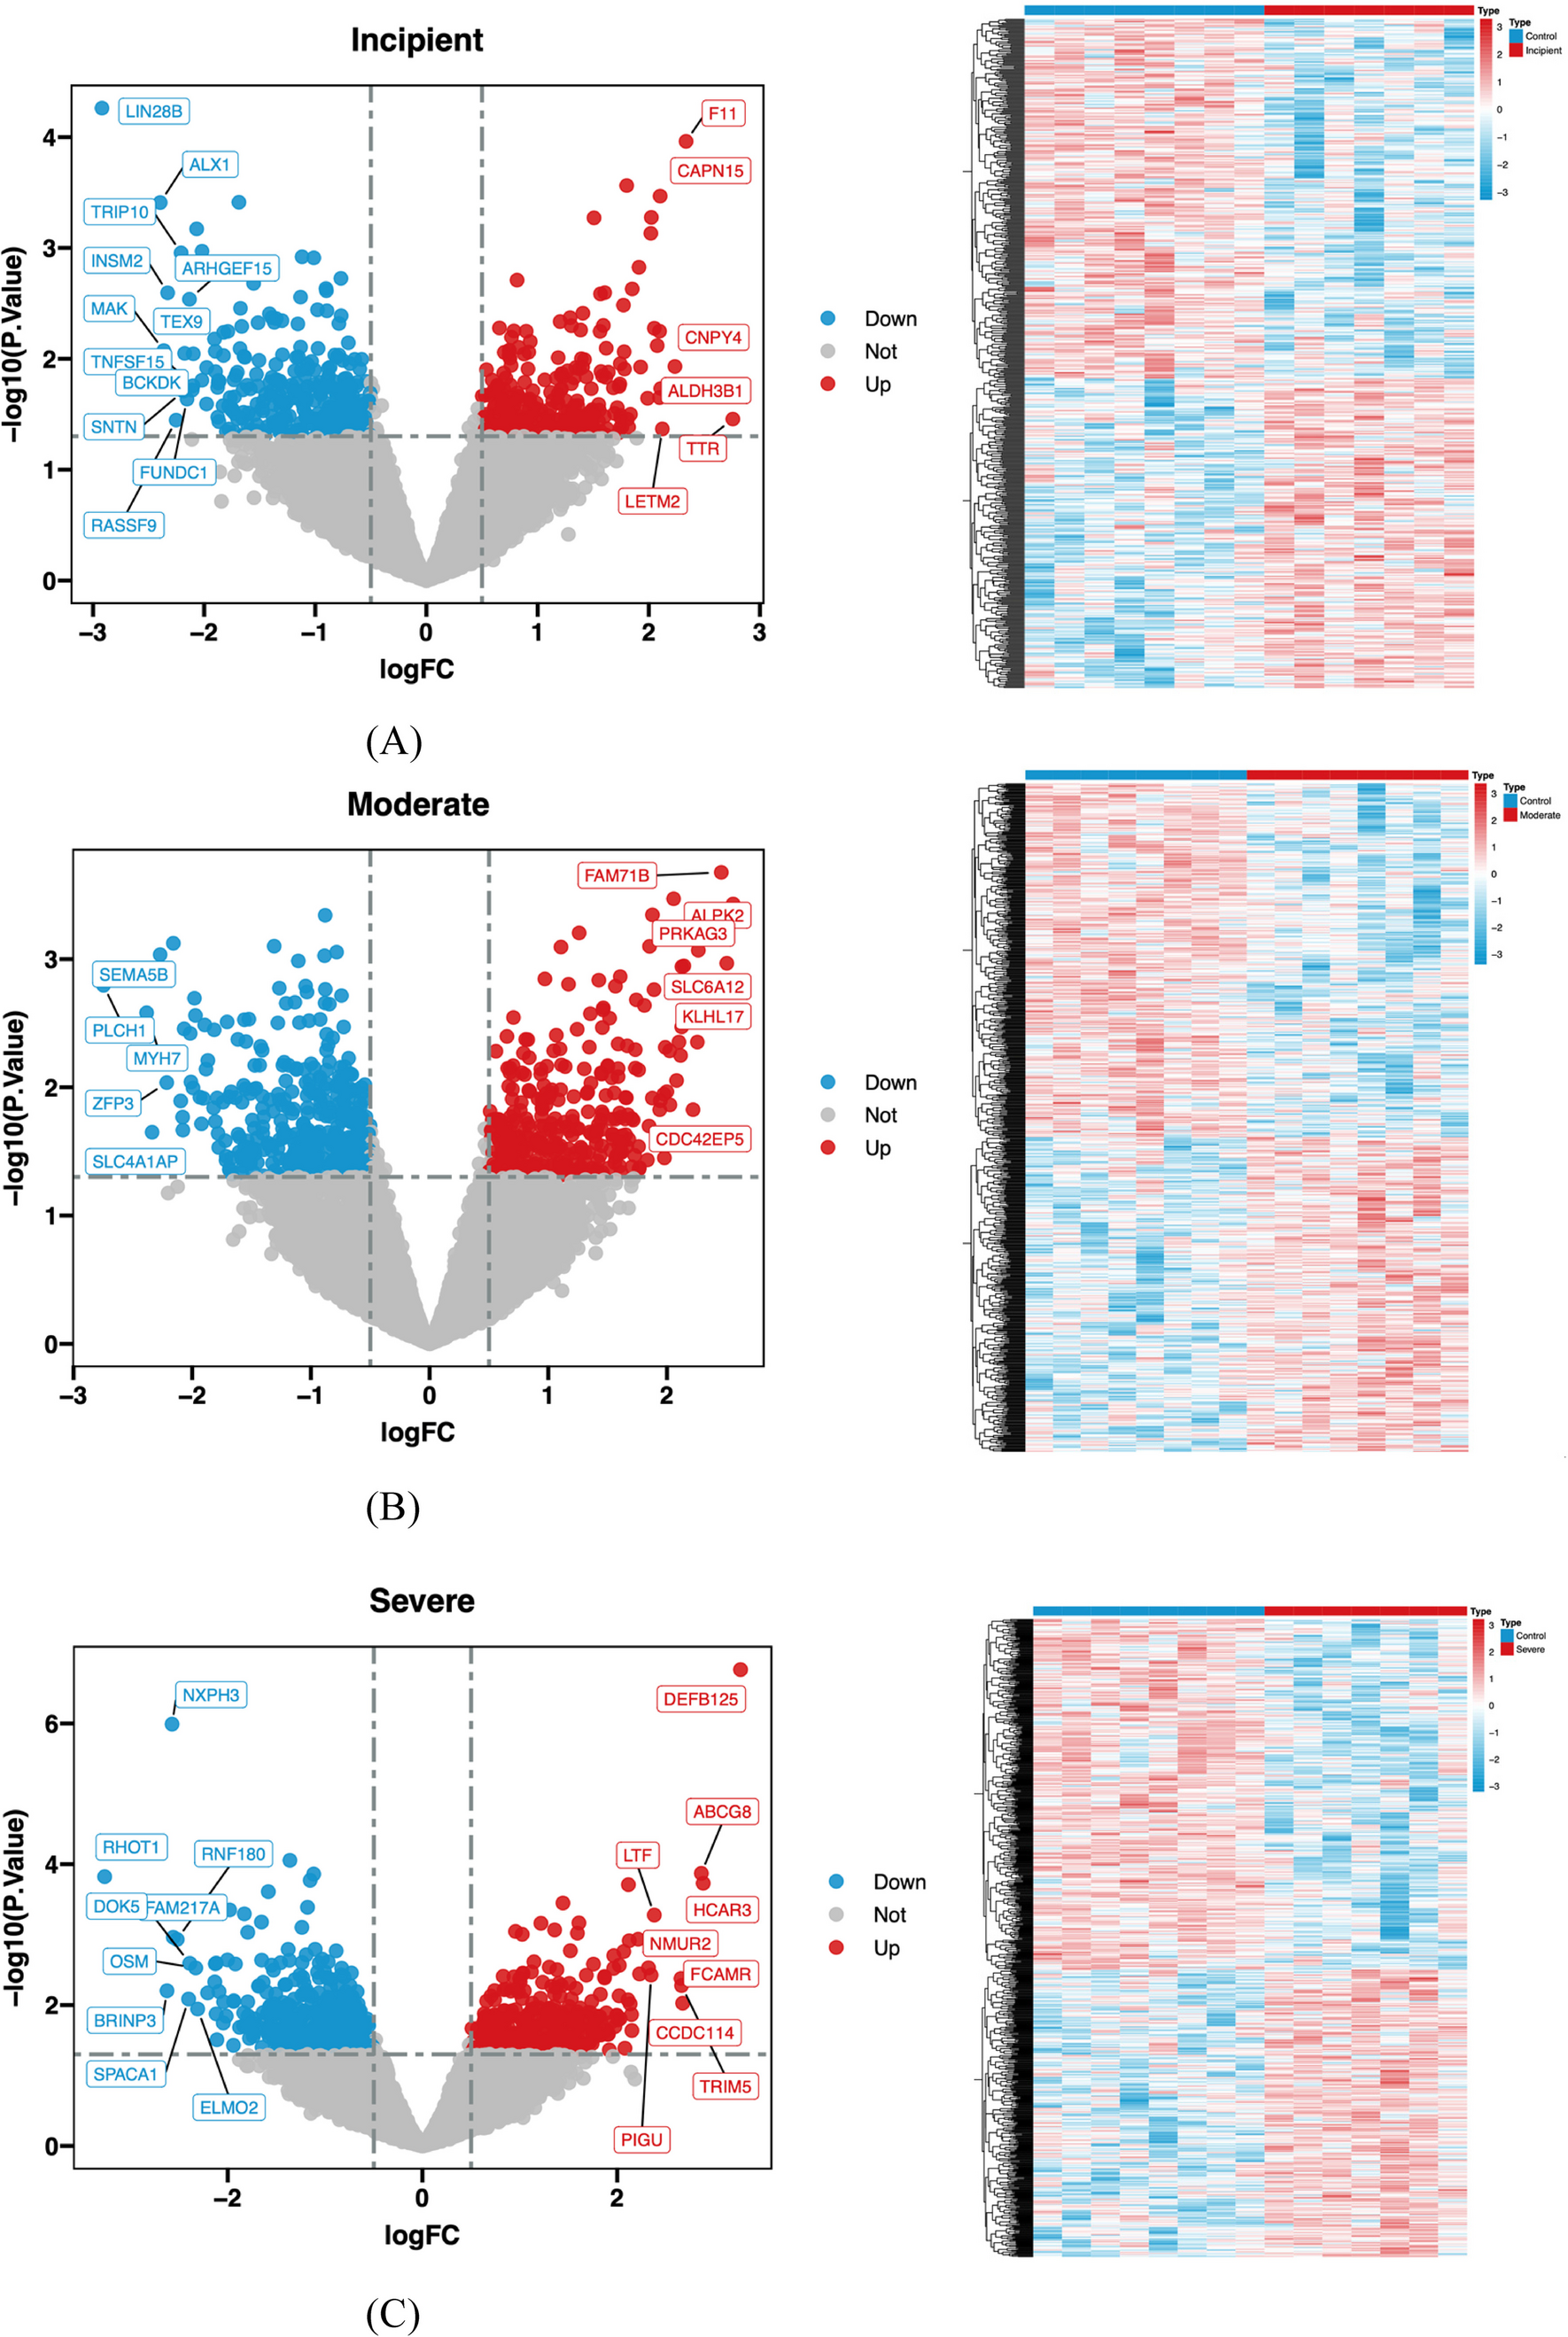 Bioinformatics to analyze the differentially expressed genes in different degrees of Alzheimer’s disease and their roles in progress of the disease